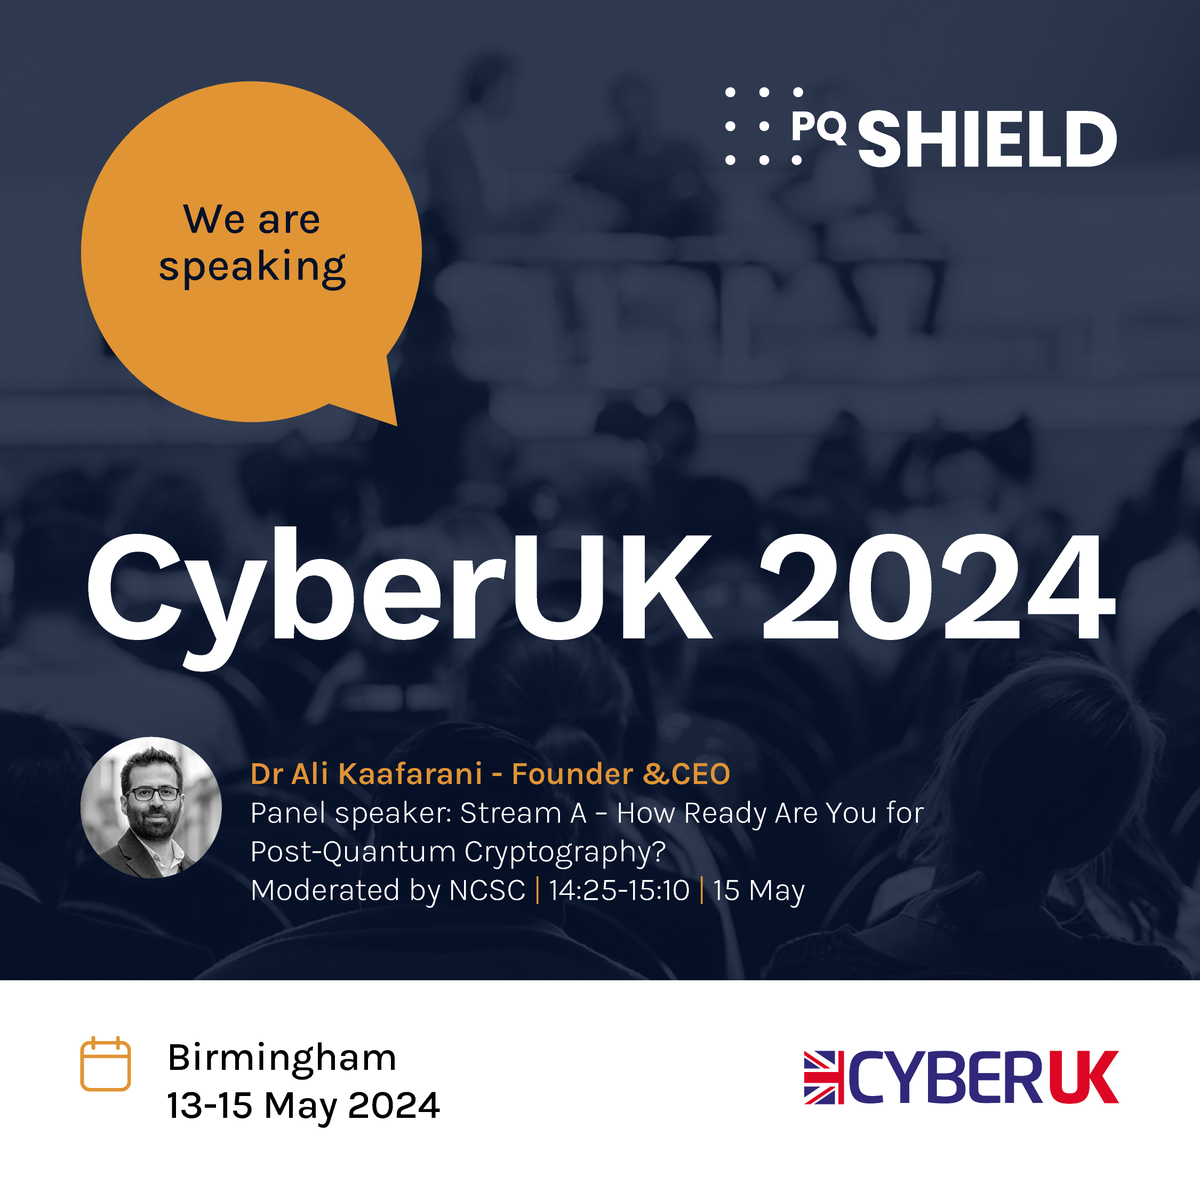 Our CEO and Founder Dr Ali Kaafarani will be speaking at @CYBERUKevents today – How Ready Are You for Post-Quantum Cryptography? - 14:25-15:10pm.(Moderated by the @NCSC. #cybersecurity #cryptography